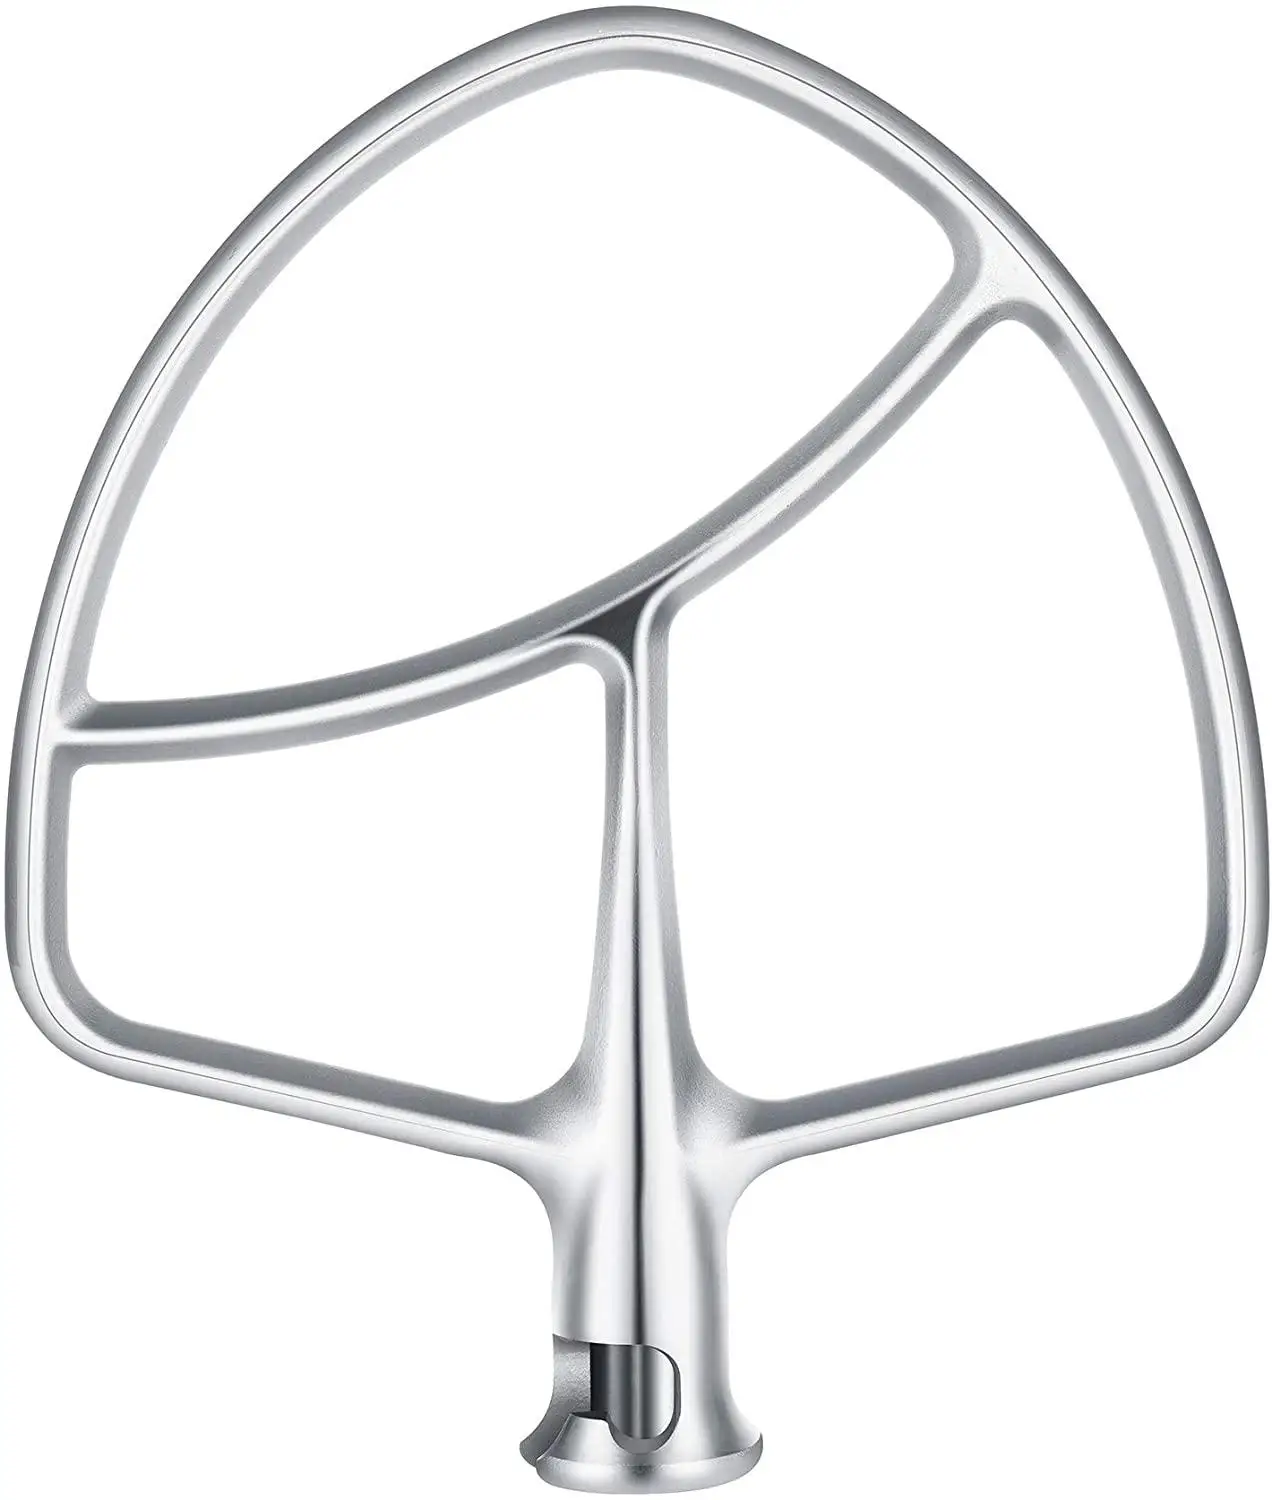  Flat Beater for KitchenAid 5-6 Quart Bowl-Lift Stand Mixer,  Stainless Steel Paddle Attachments Fits for Kitchenaid Professional 5 Plus  and 600 Seris Mixer, Mixing Accessories, Dishwasher Safe : Everything Else